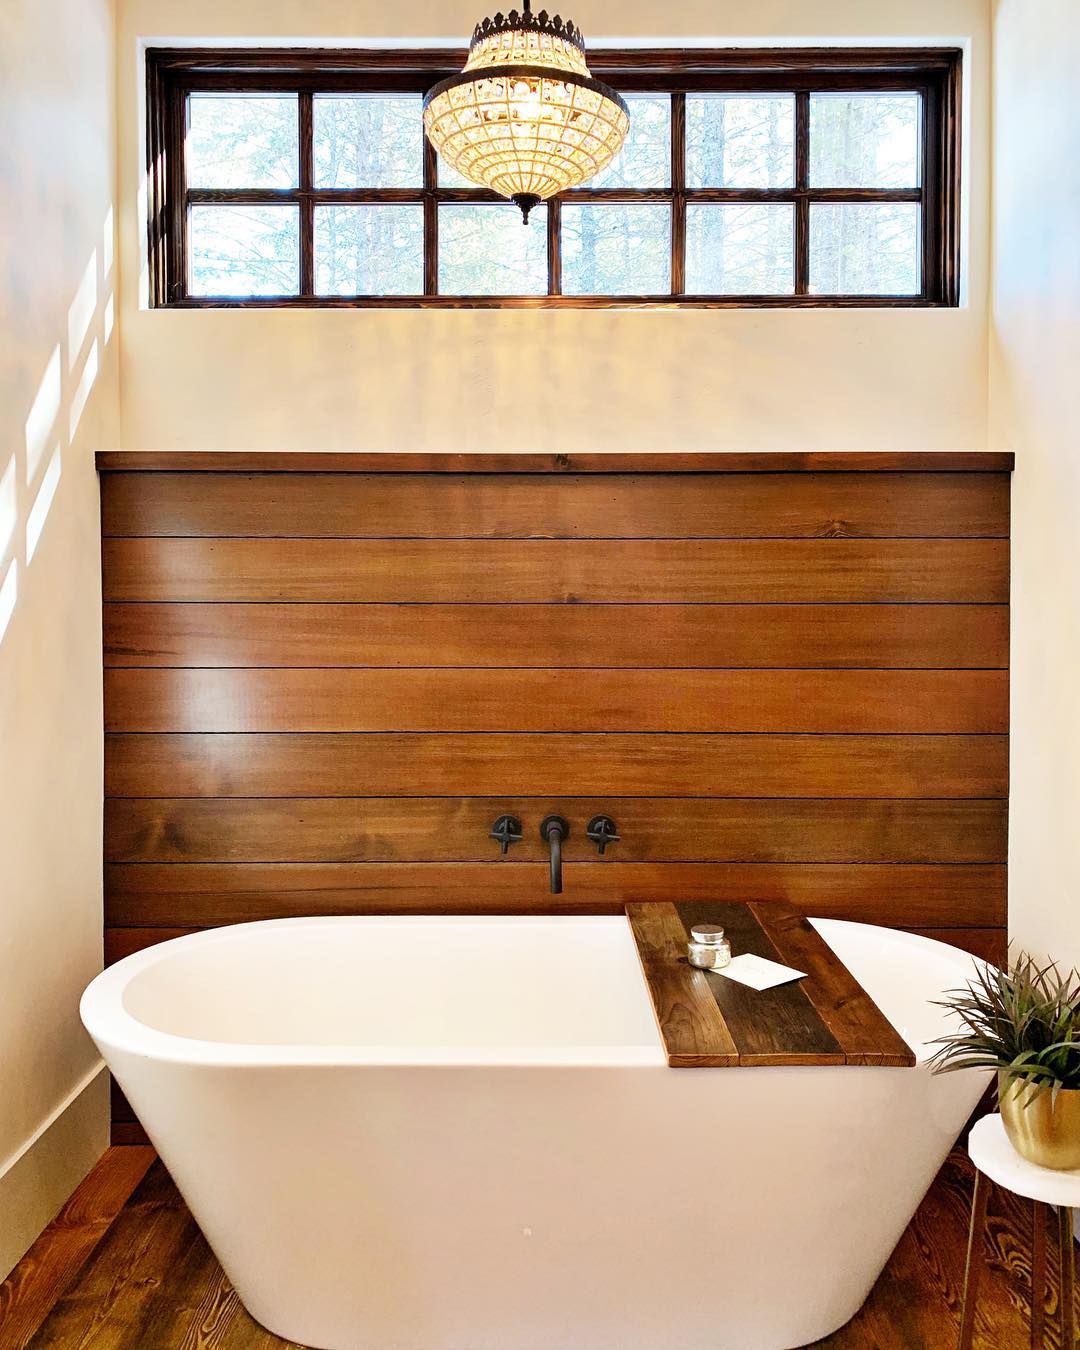 Reclaimed plank bath board...idea by our client and brought to life by my dad...out of reclaimed wood. What a fun and perfect pop idea! @shaunajavens whitefish custom home builder